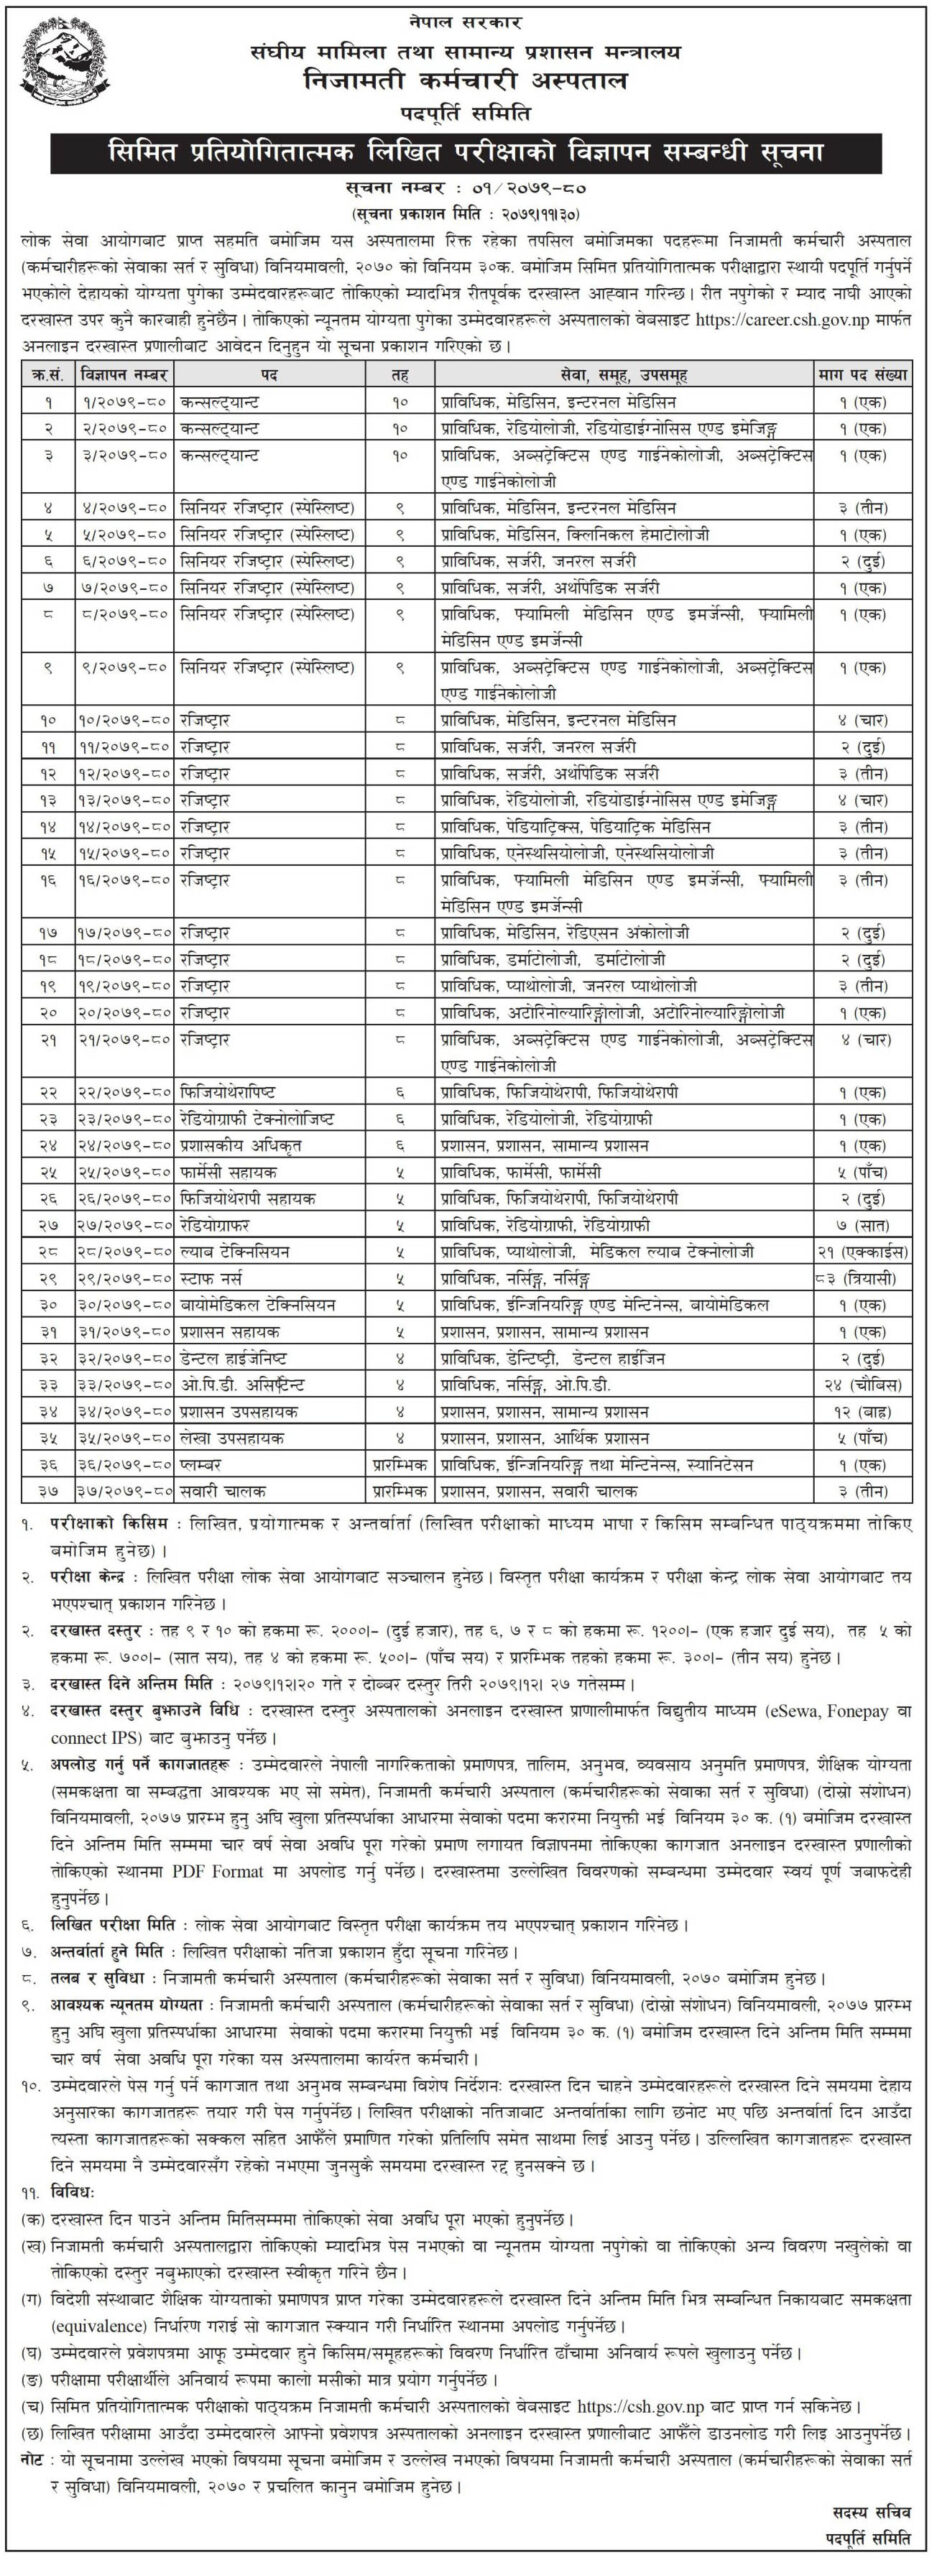 Civil Service Hospital has opened job vacancy applications for permanent posts through open/inclusive and internal competition for various non-technical, technical and health service posts.